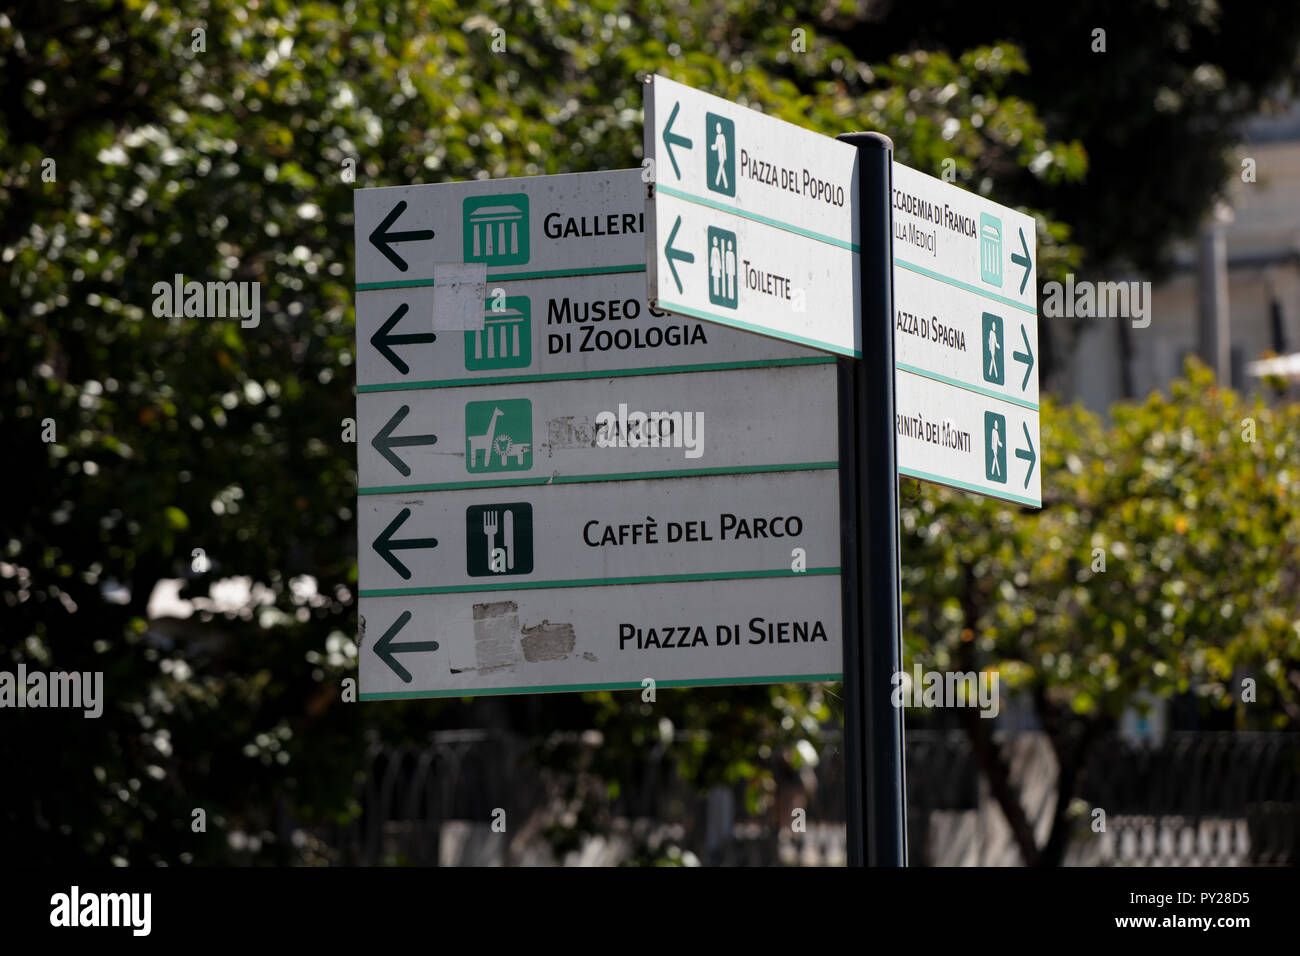 Street sign in the Pincio Gardens with directions to many of the key tourist sights in the area. Stock Photo